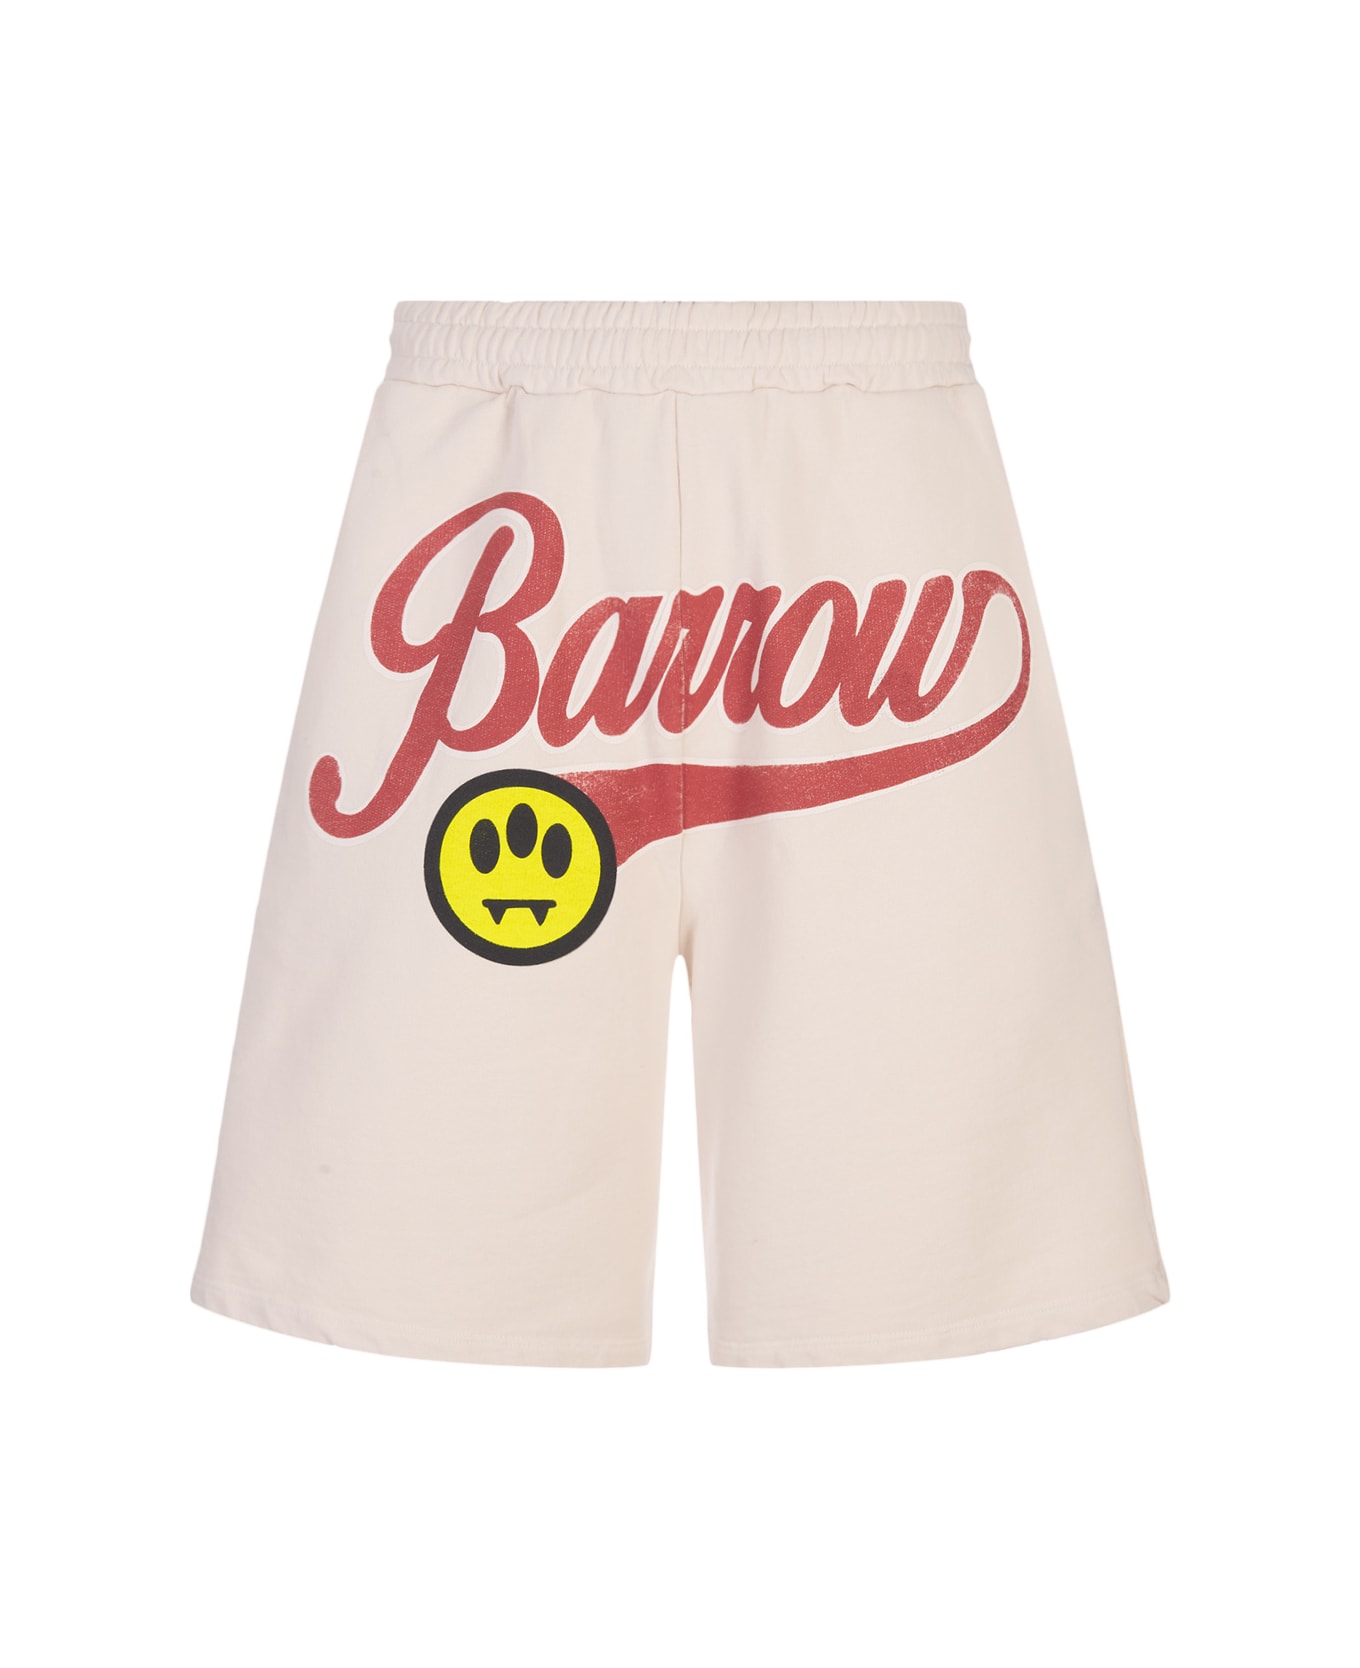 Barrow Taupe Bermuda Shorts With Lettering Prints. - Brown ショートパンツ